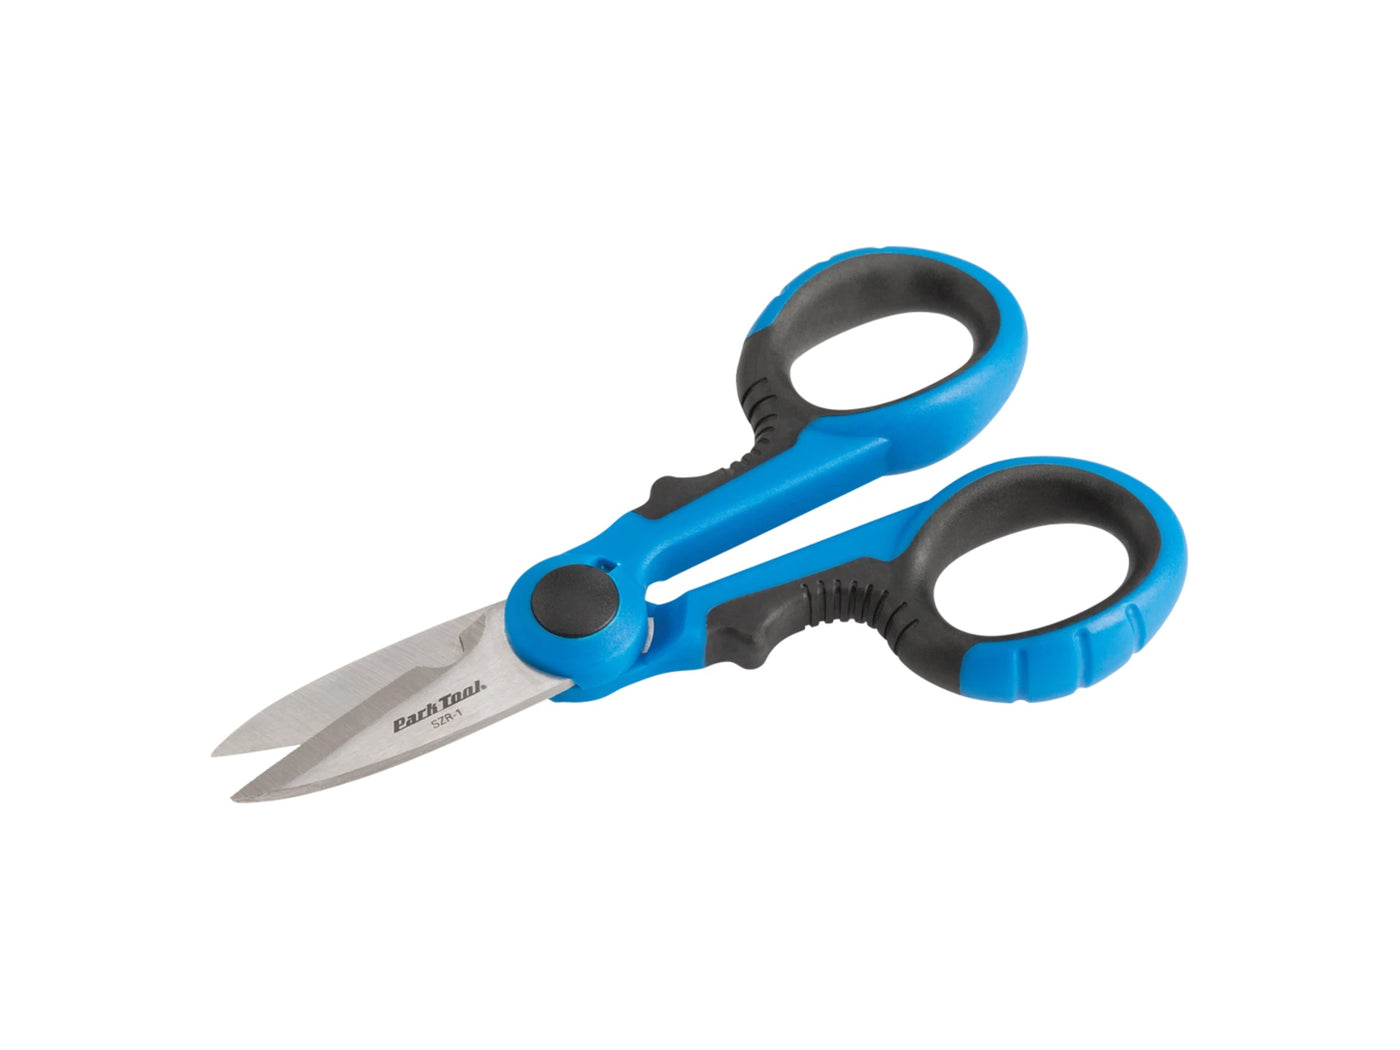 Park Tool Bicycle Shop Quality Stainless Steel Scissors SZR-1 Bike Tool Blue